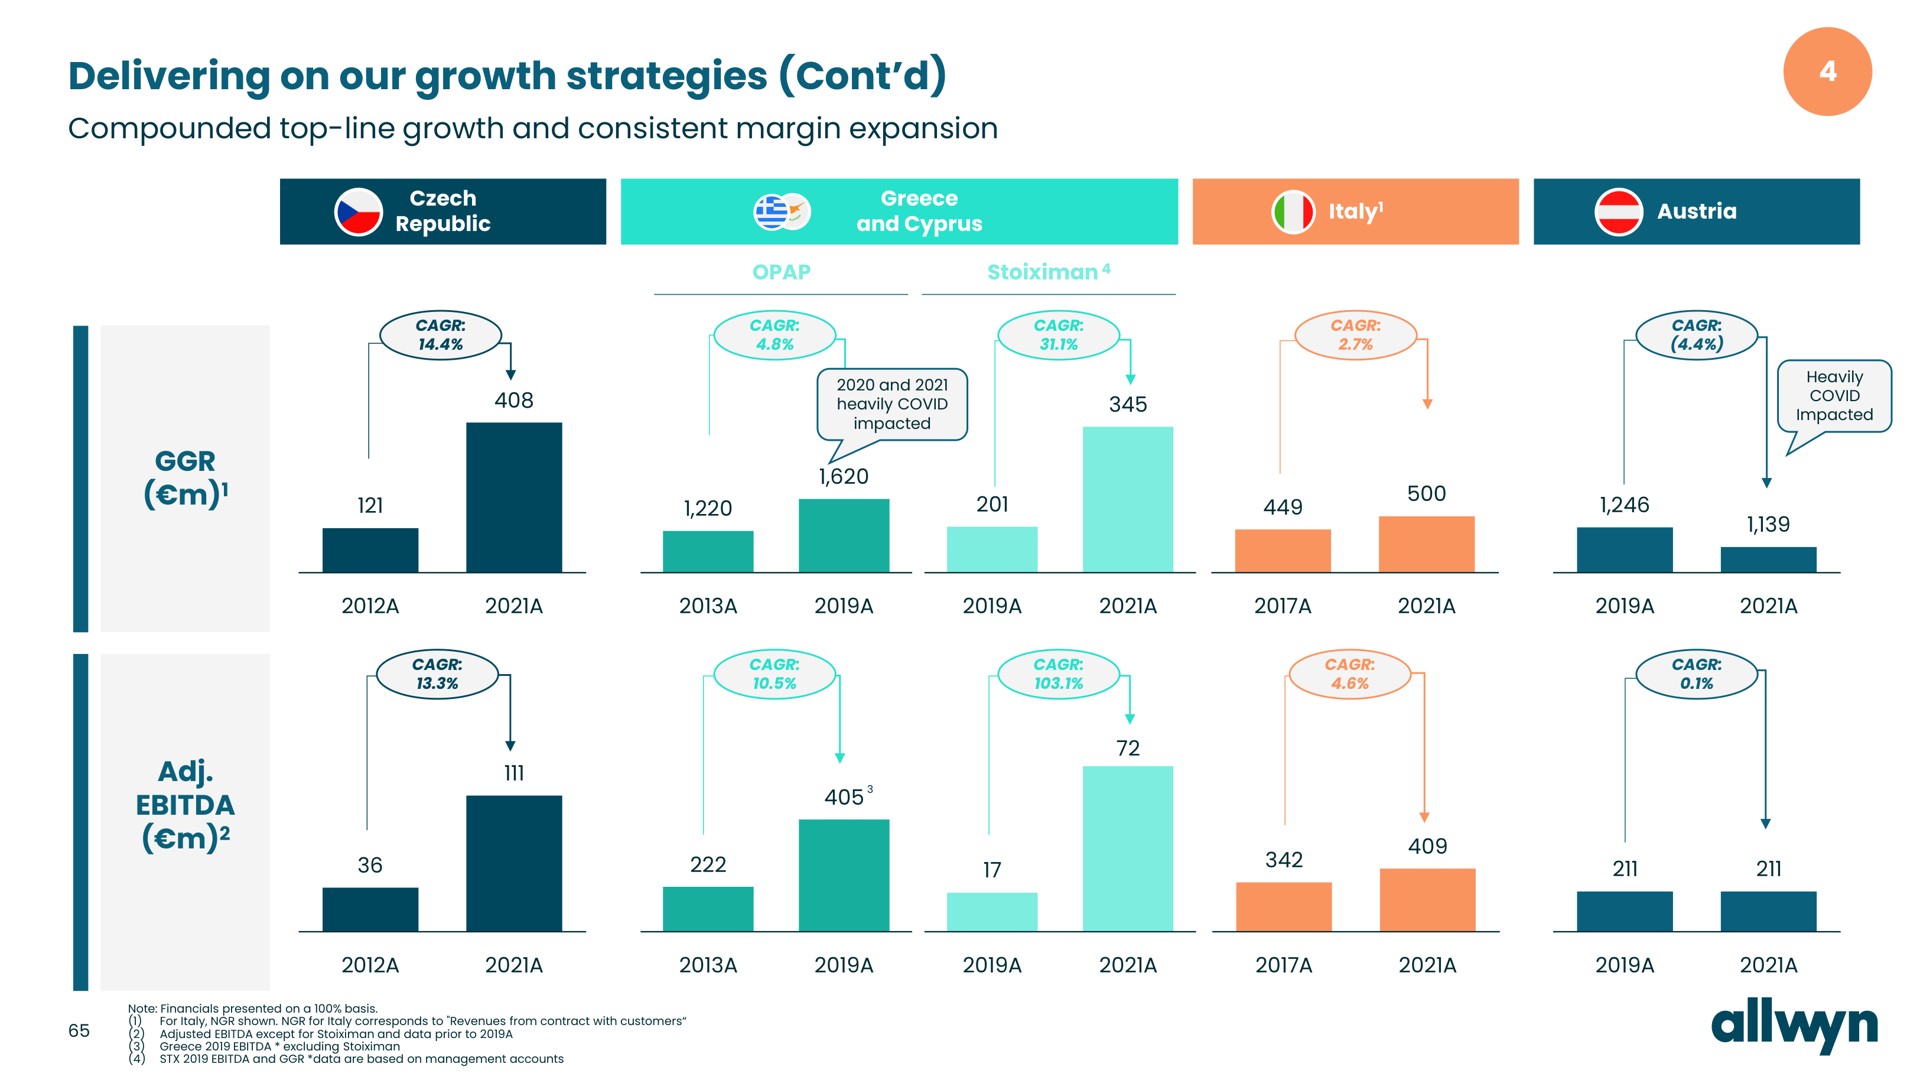 delivering on our growth strategies | Allwyn